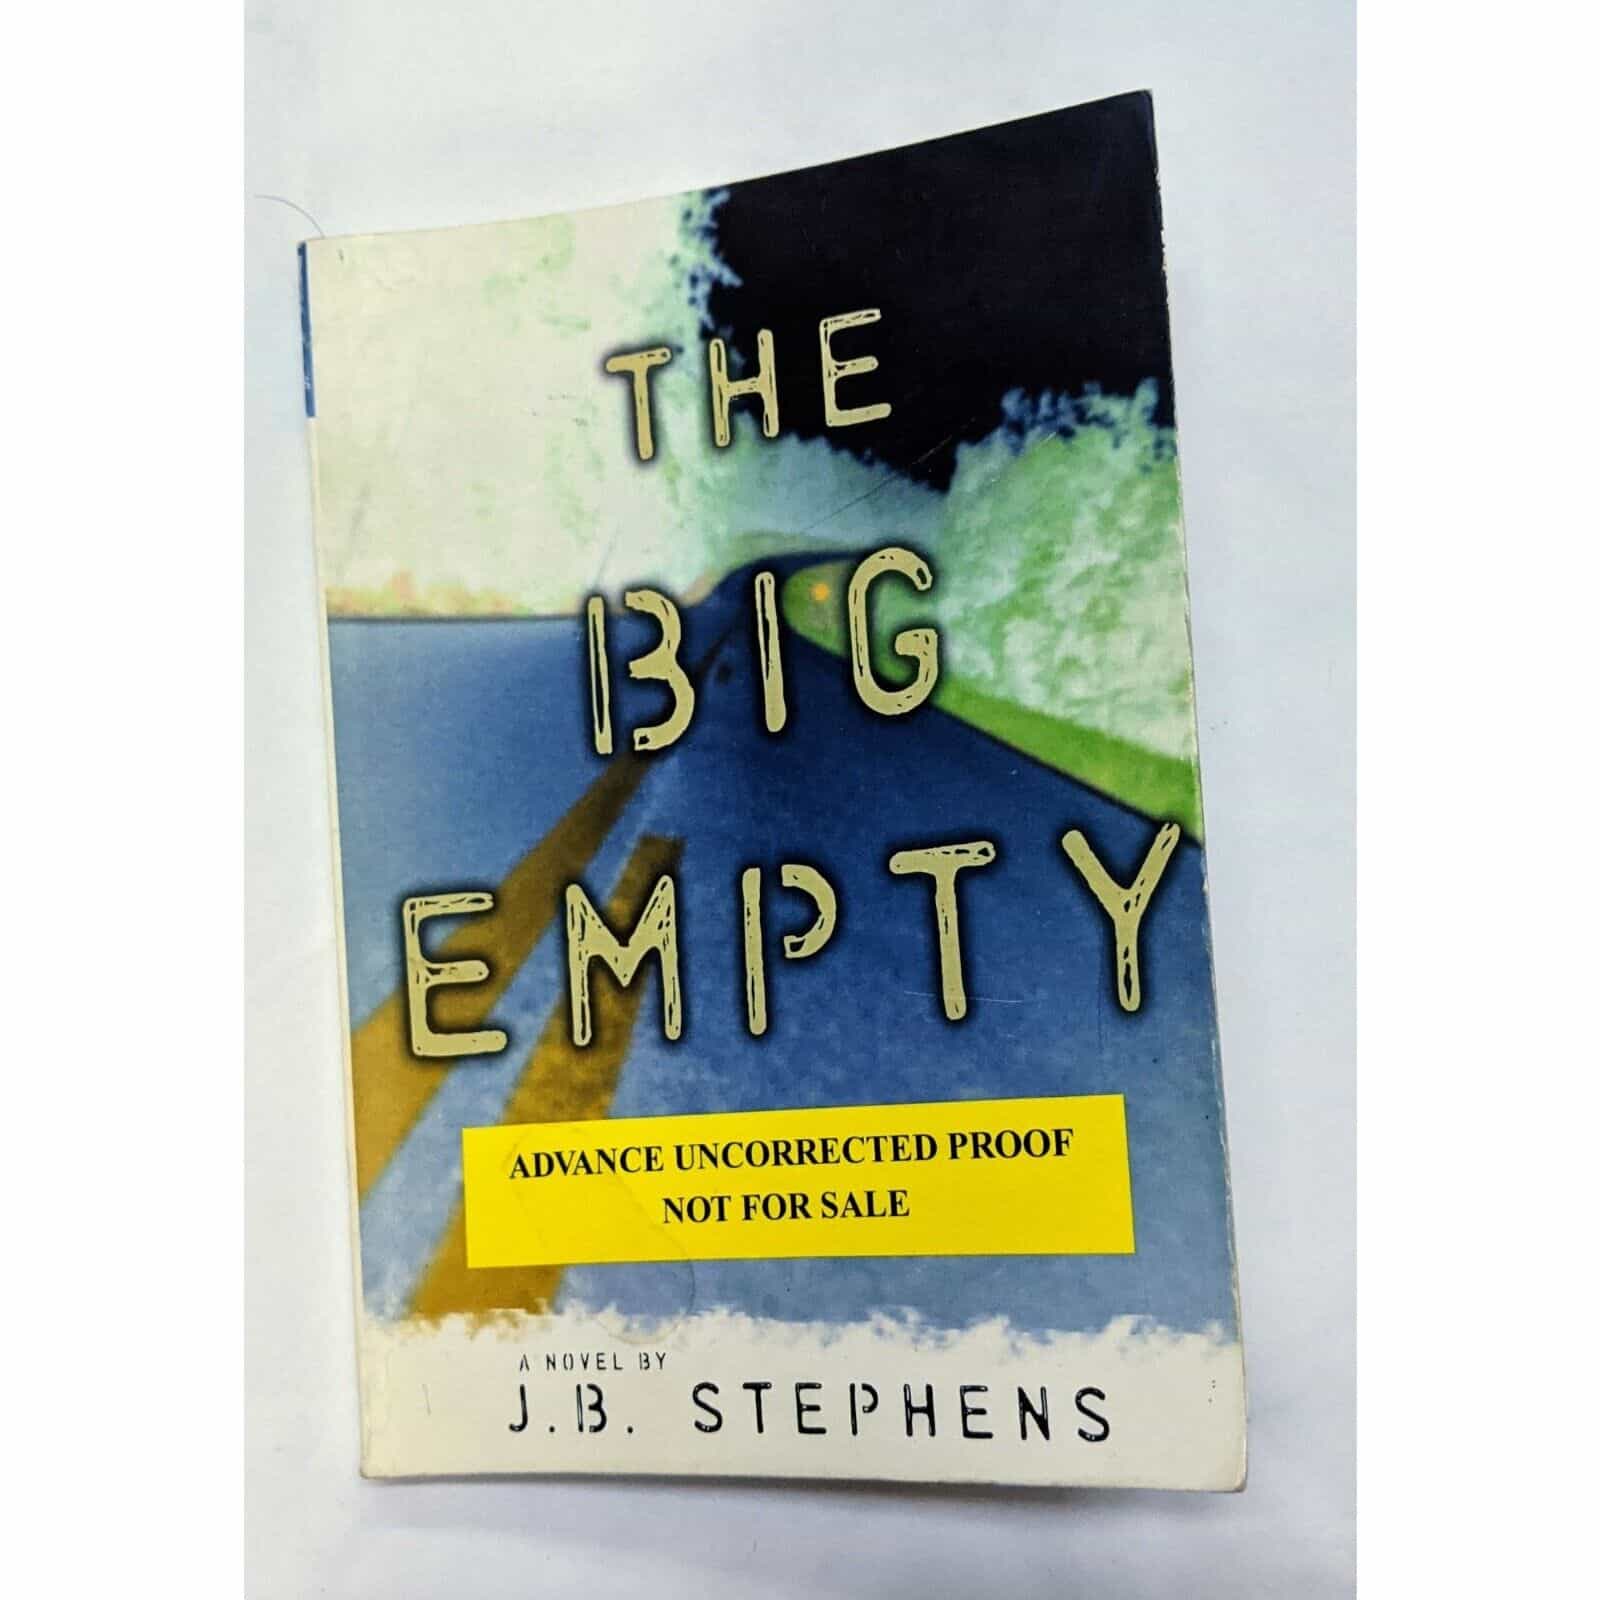 The Big Empty by J.B. Stephens Book Advance Uncorrected Proof